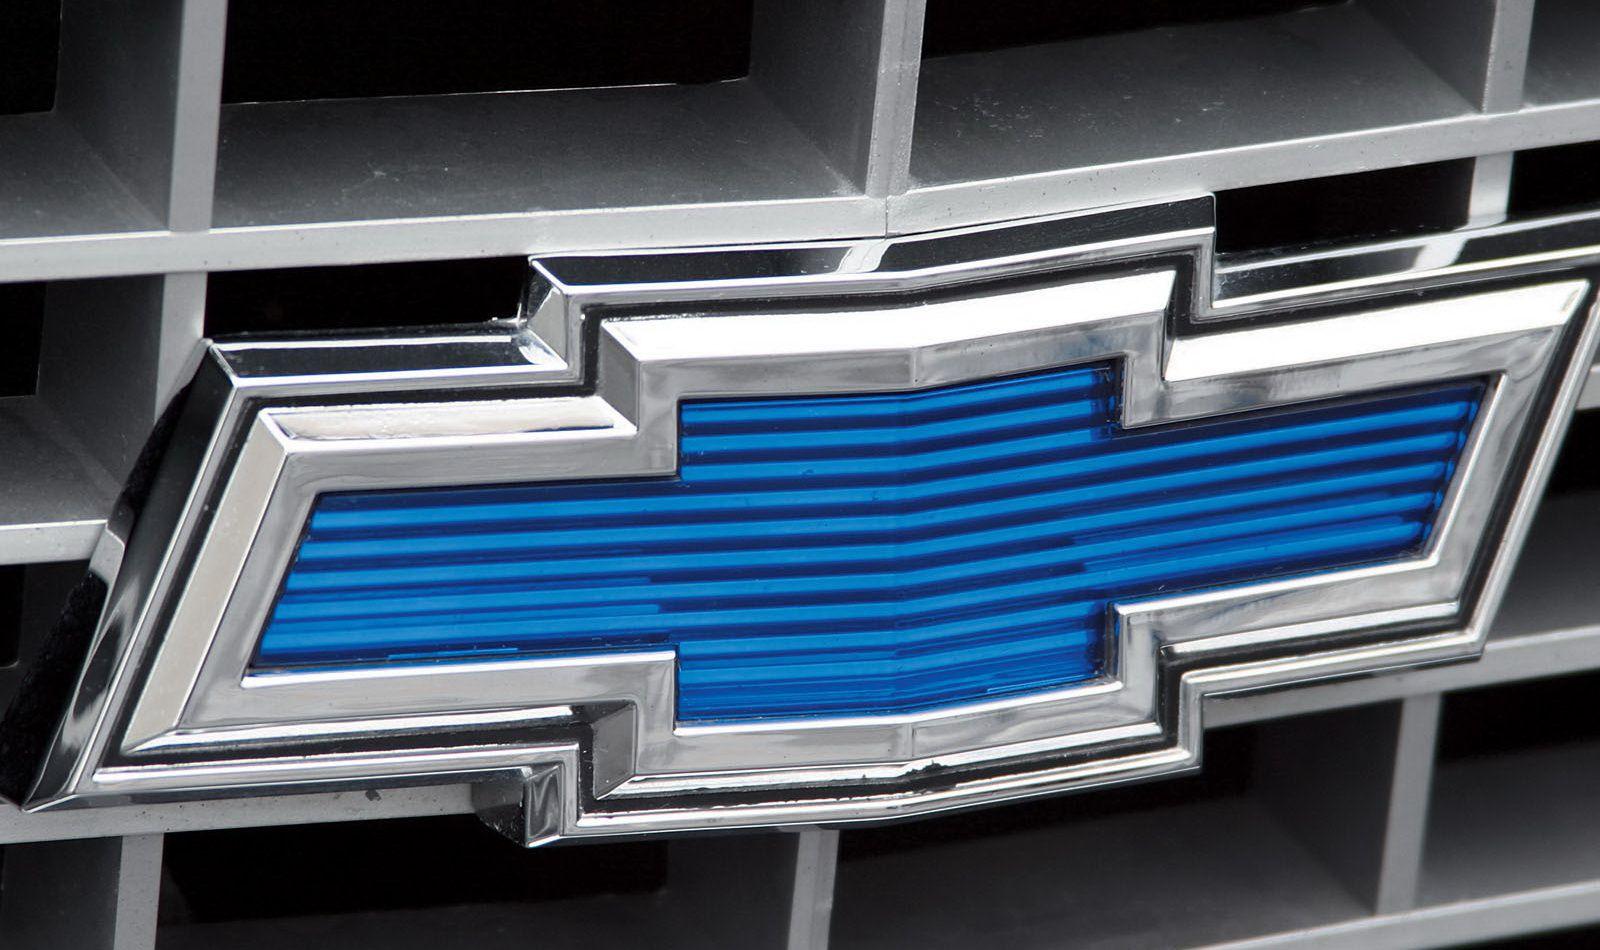 Blue Chevy Logo - Chevy Logo, Chevrolet Car Symbol Meaning and History | Car Brand ...